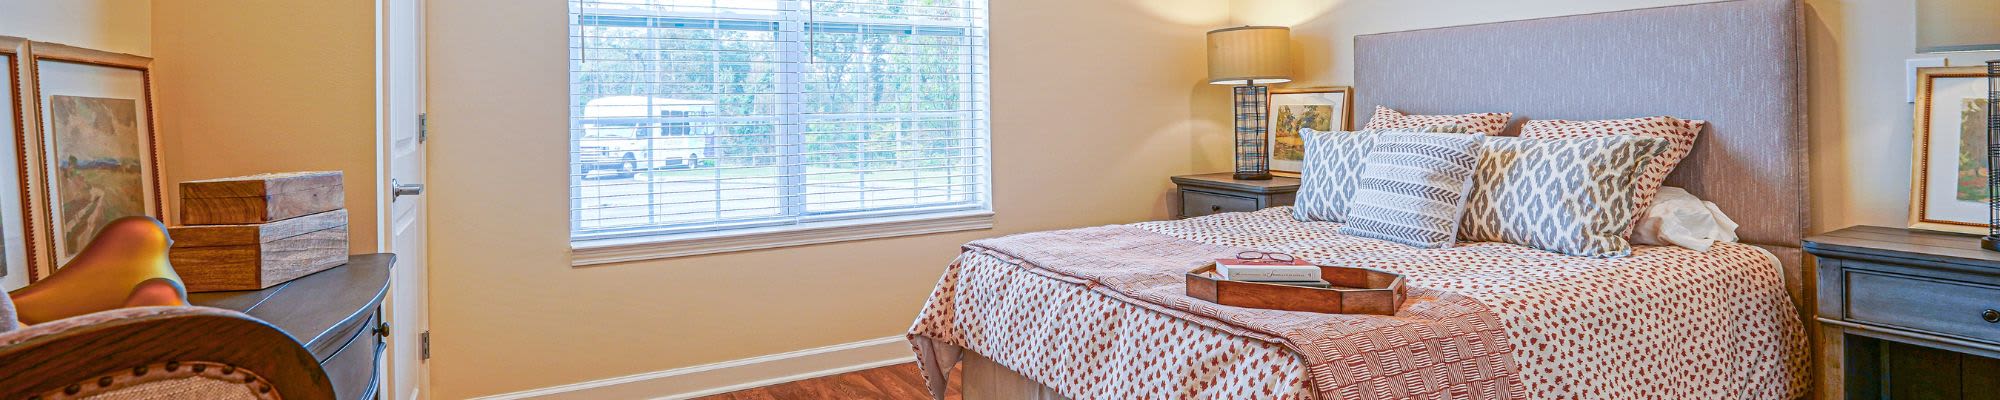 Independent Living at Harmony at Reynolds Mountain in Asheville, North Carolina